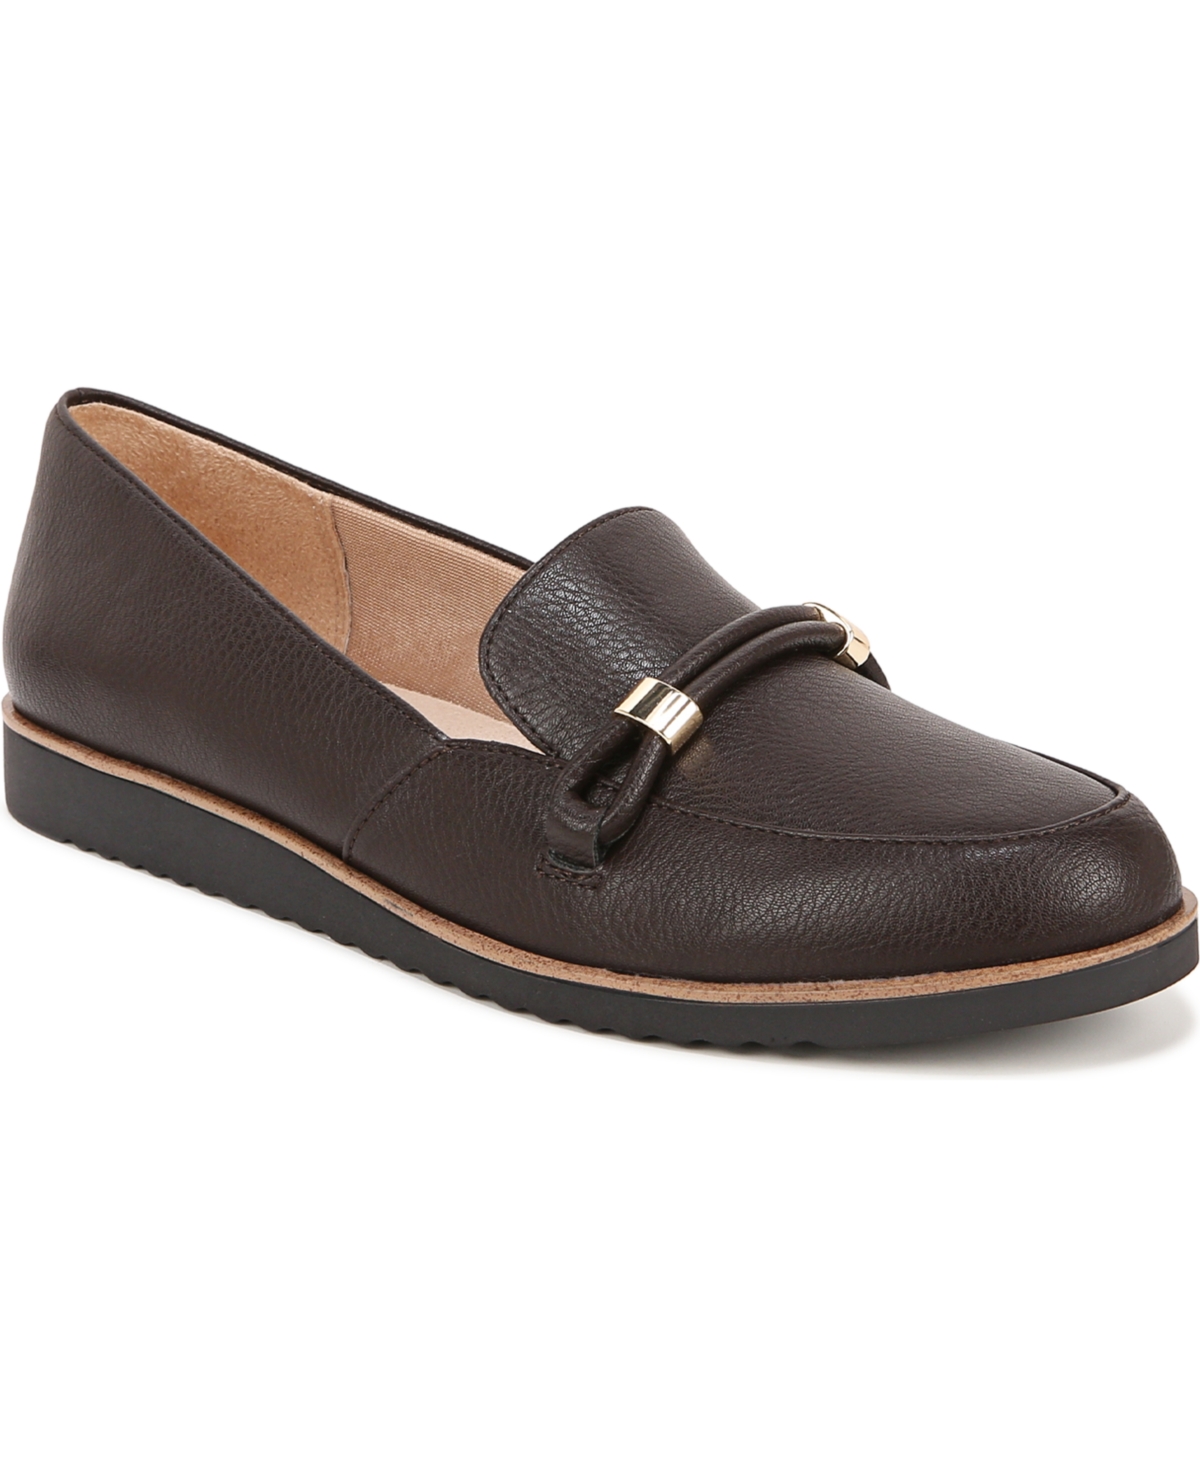 Lifestride Zahara Slip-ons In Chocolate Brown Faux Leather